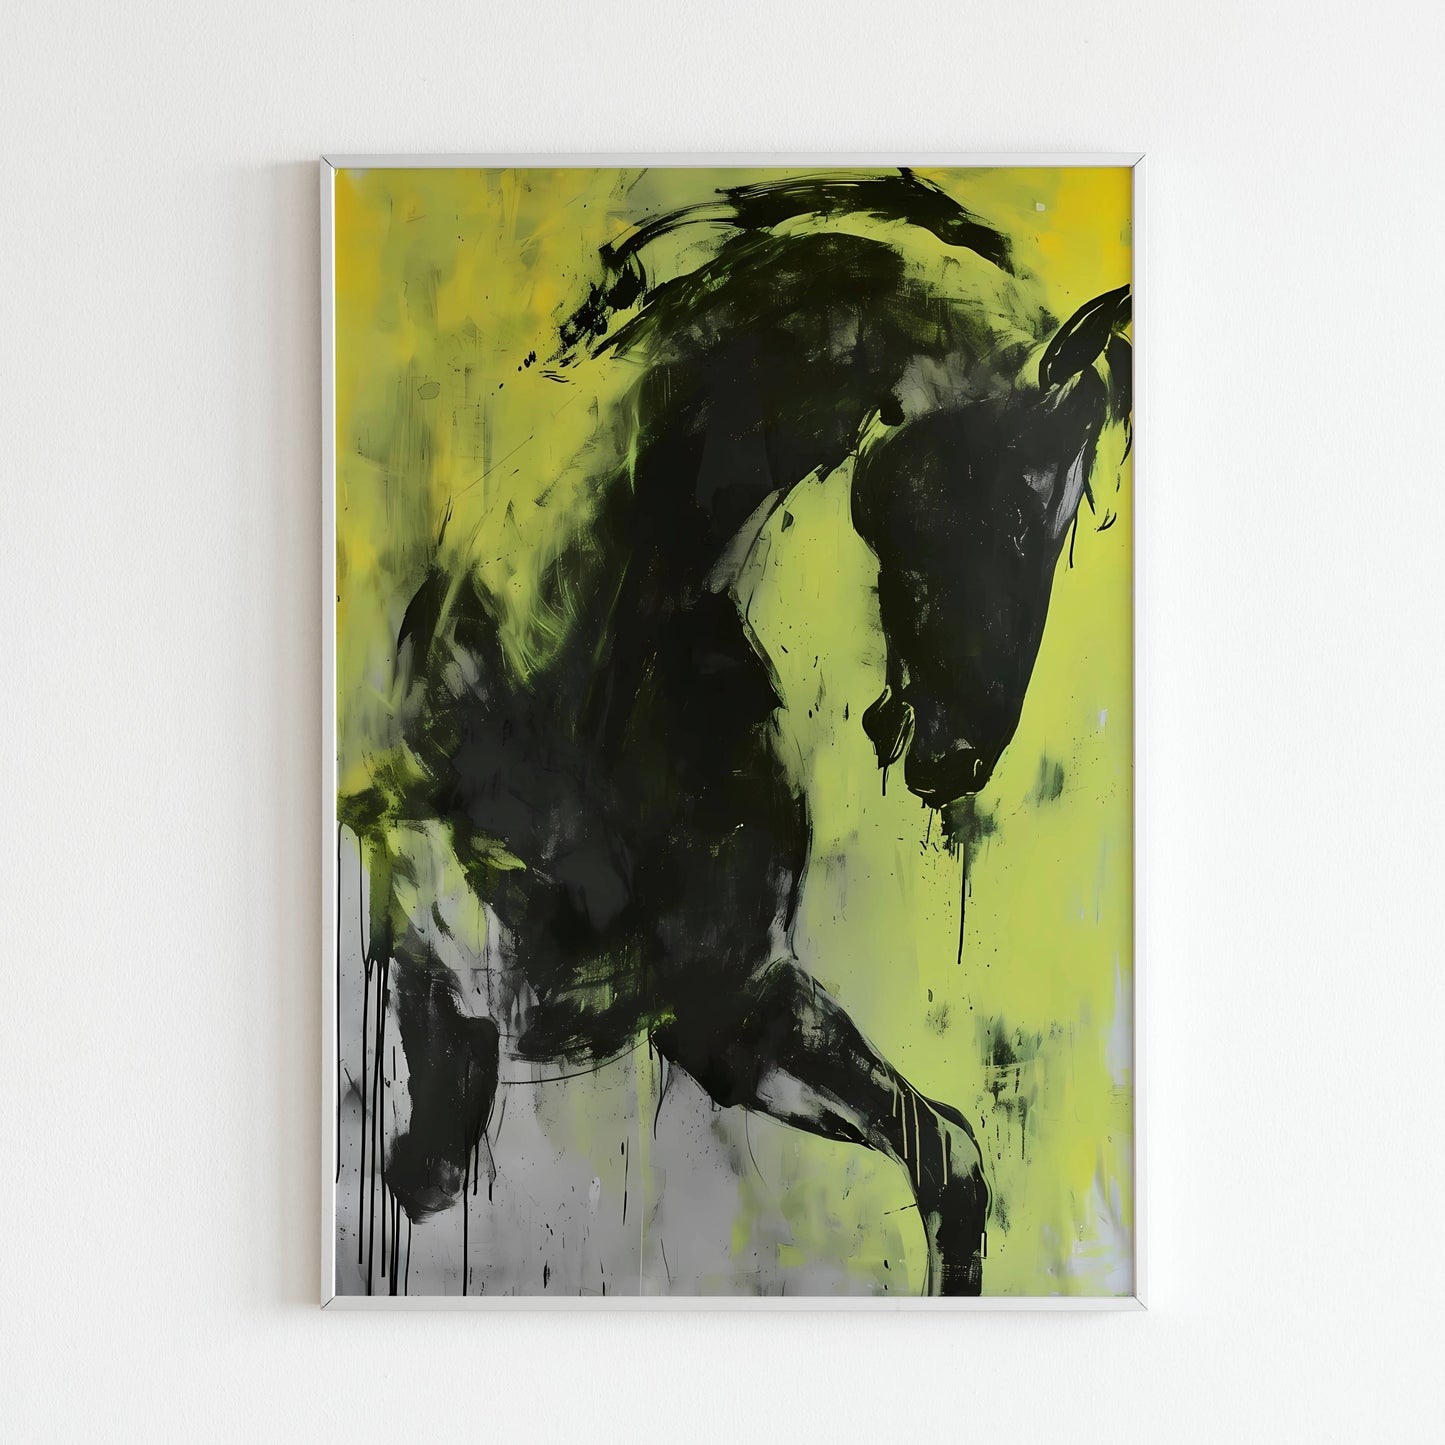 Minimalist Horse - Printed Wall Art / Poster. This beautiful minimalist poster showcases a horse in a simple yet elegant style. Arrives ready to hang.